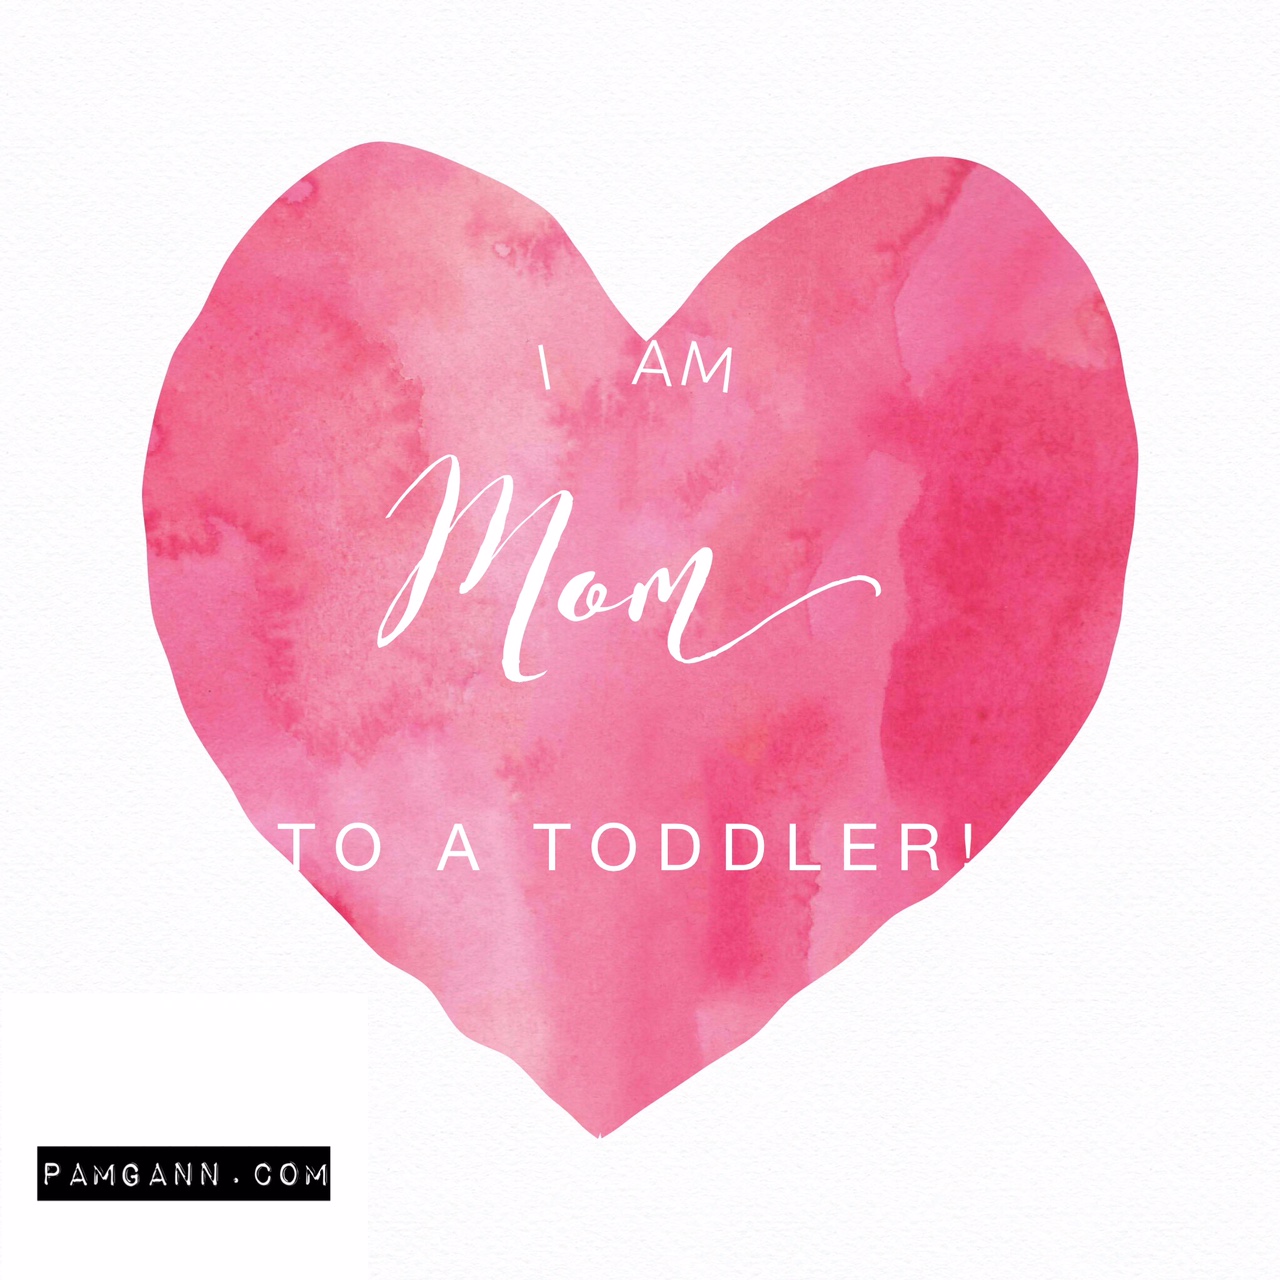 I am mom to a toddler!